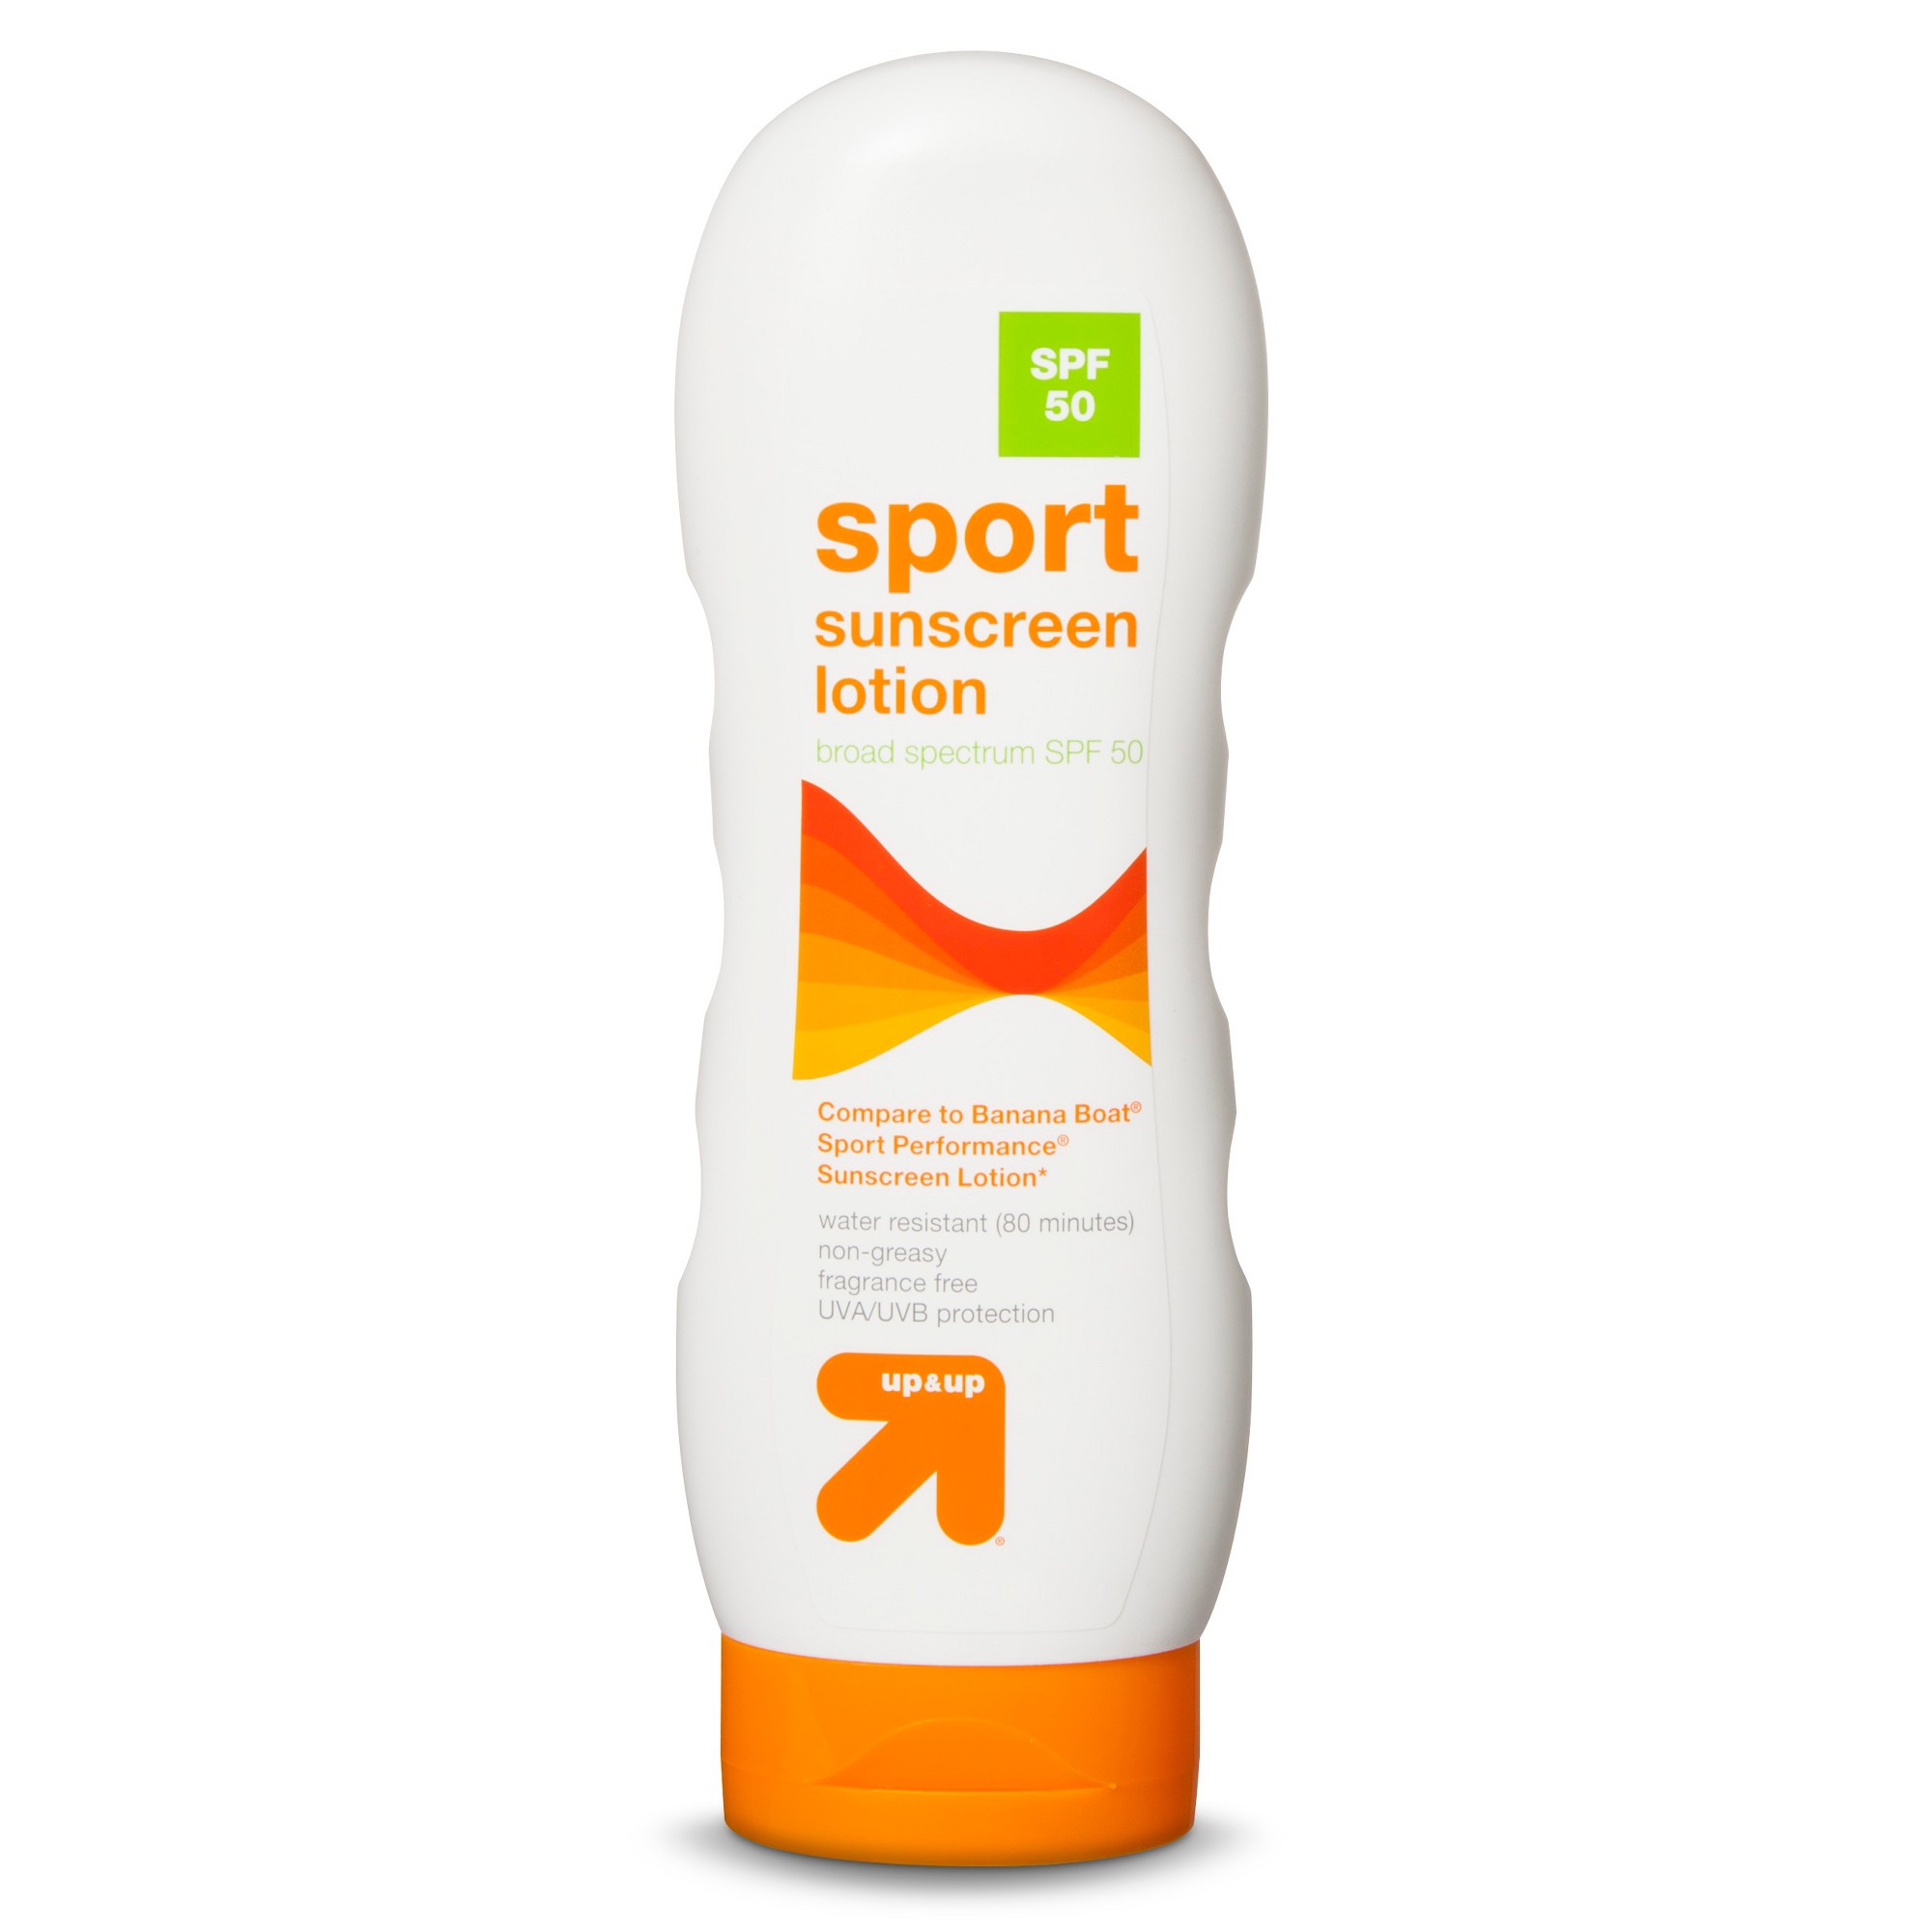 Sport Sunscreen Lotion - SPF 50 - 10.4oz - Up&Up (Compare to Banana Boat Sport Performance Sunscreen Lotion)